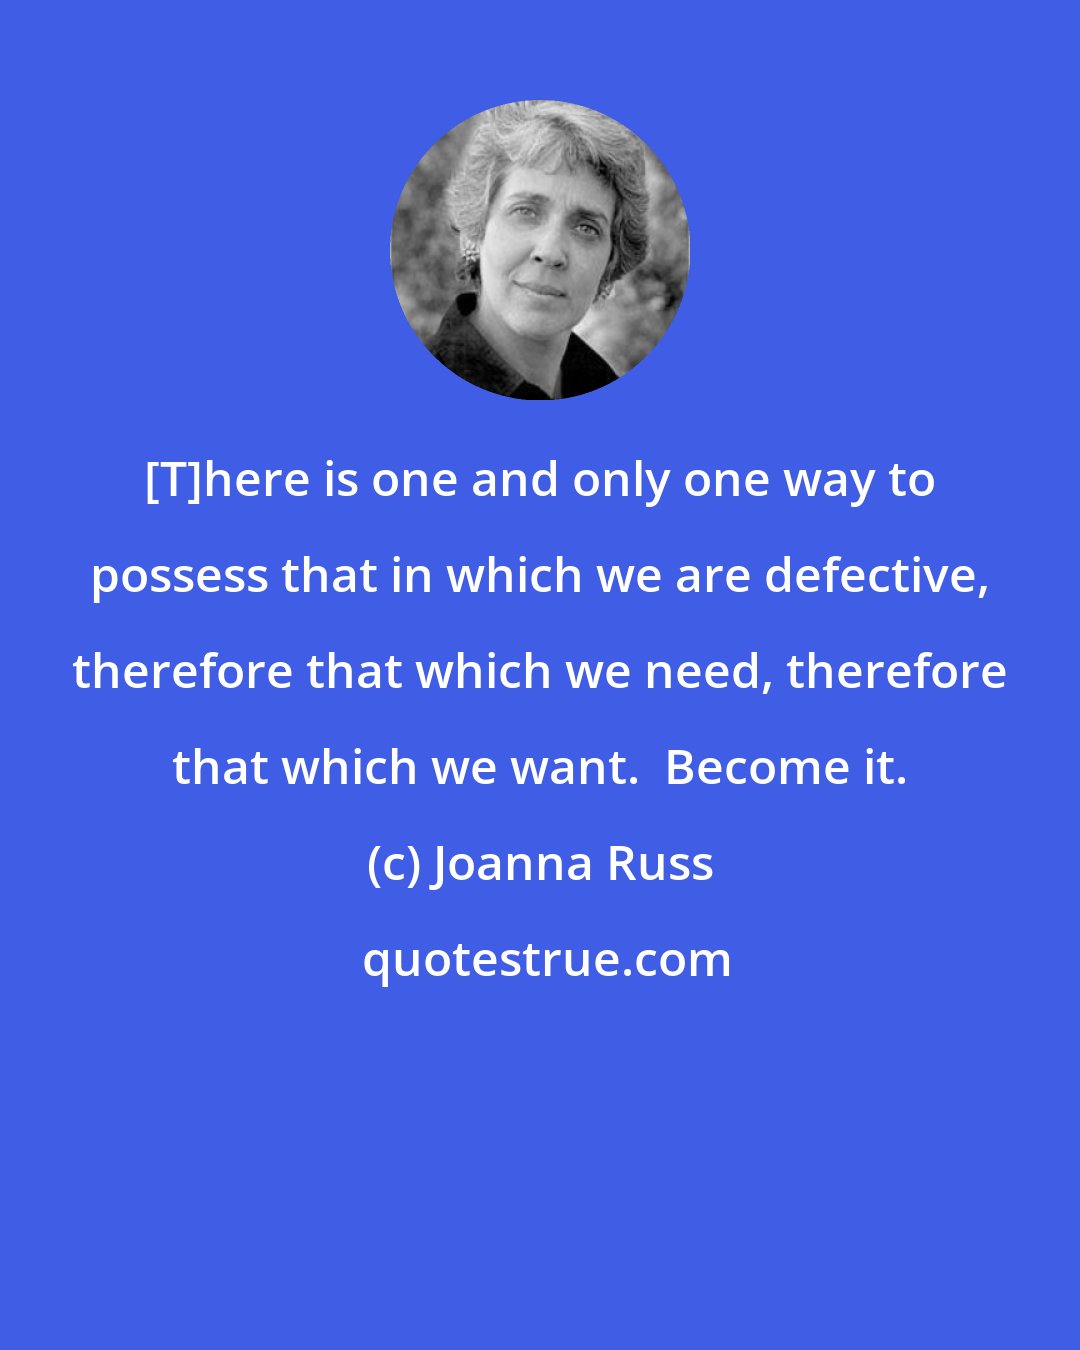 Joanna Russ: [T]here is one and only one way to possess that in which we are defective, therefore that which we need, therefore that which we want.  Become it.